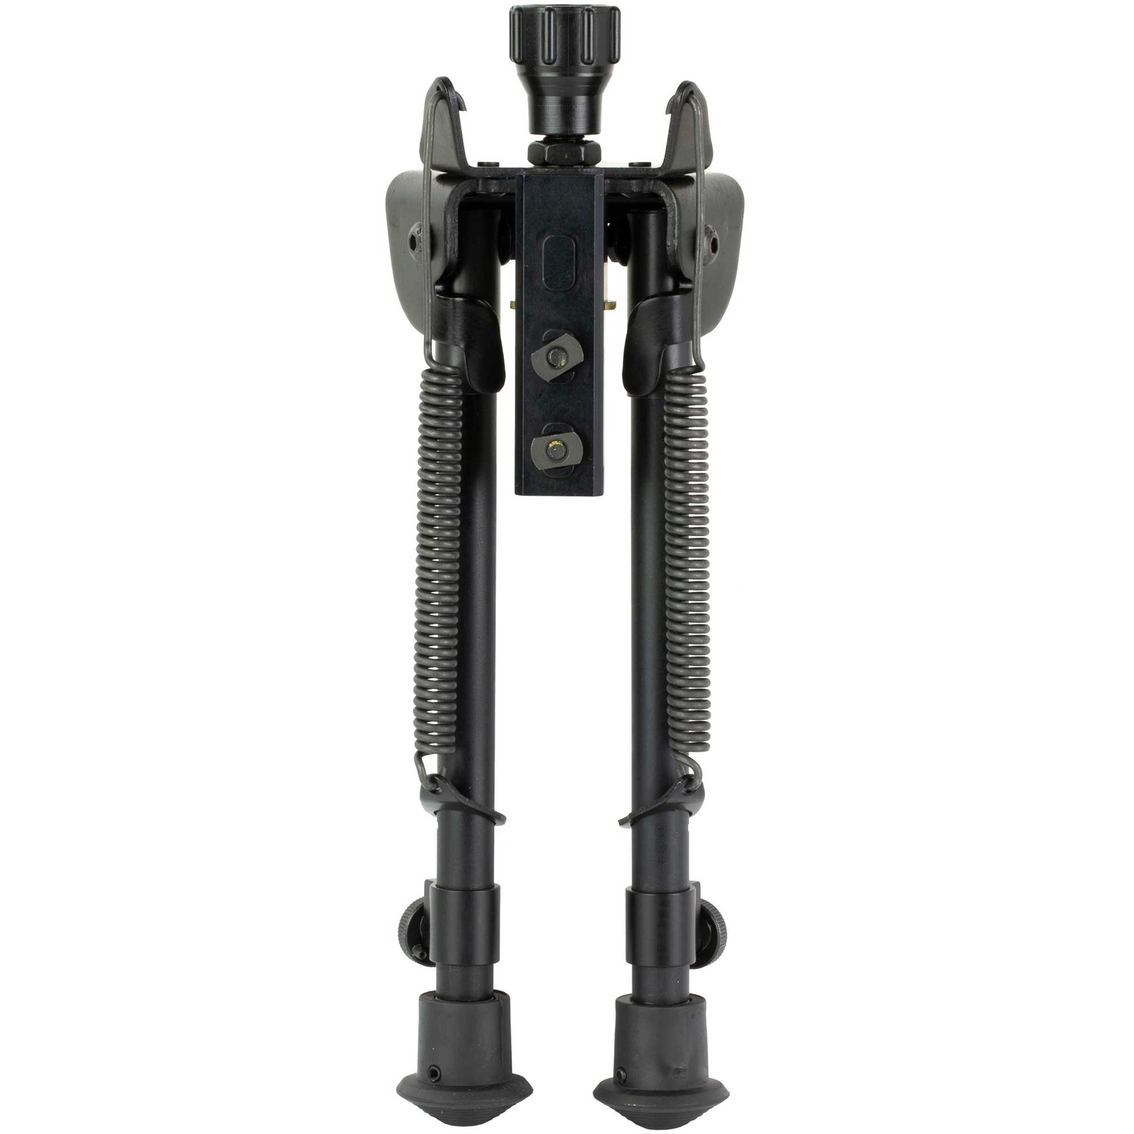 Harris 9 to 13 in. Rotating Self Leveling Bipod, Black - Image 3 of 3